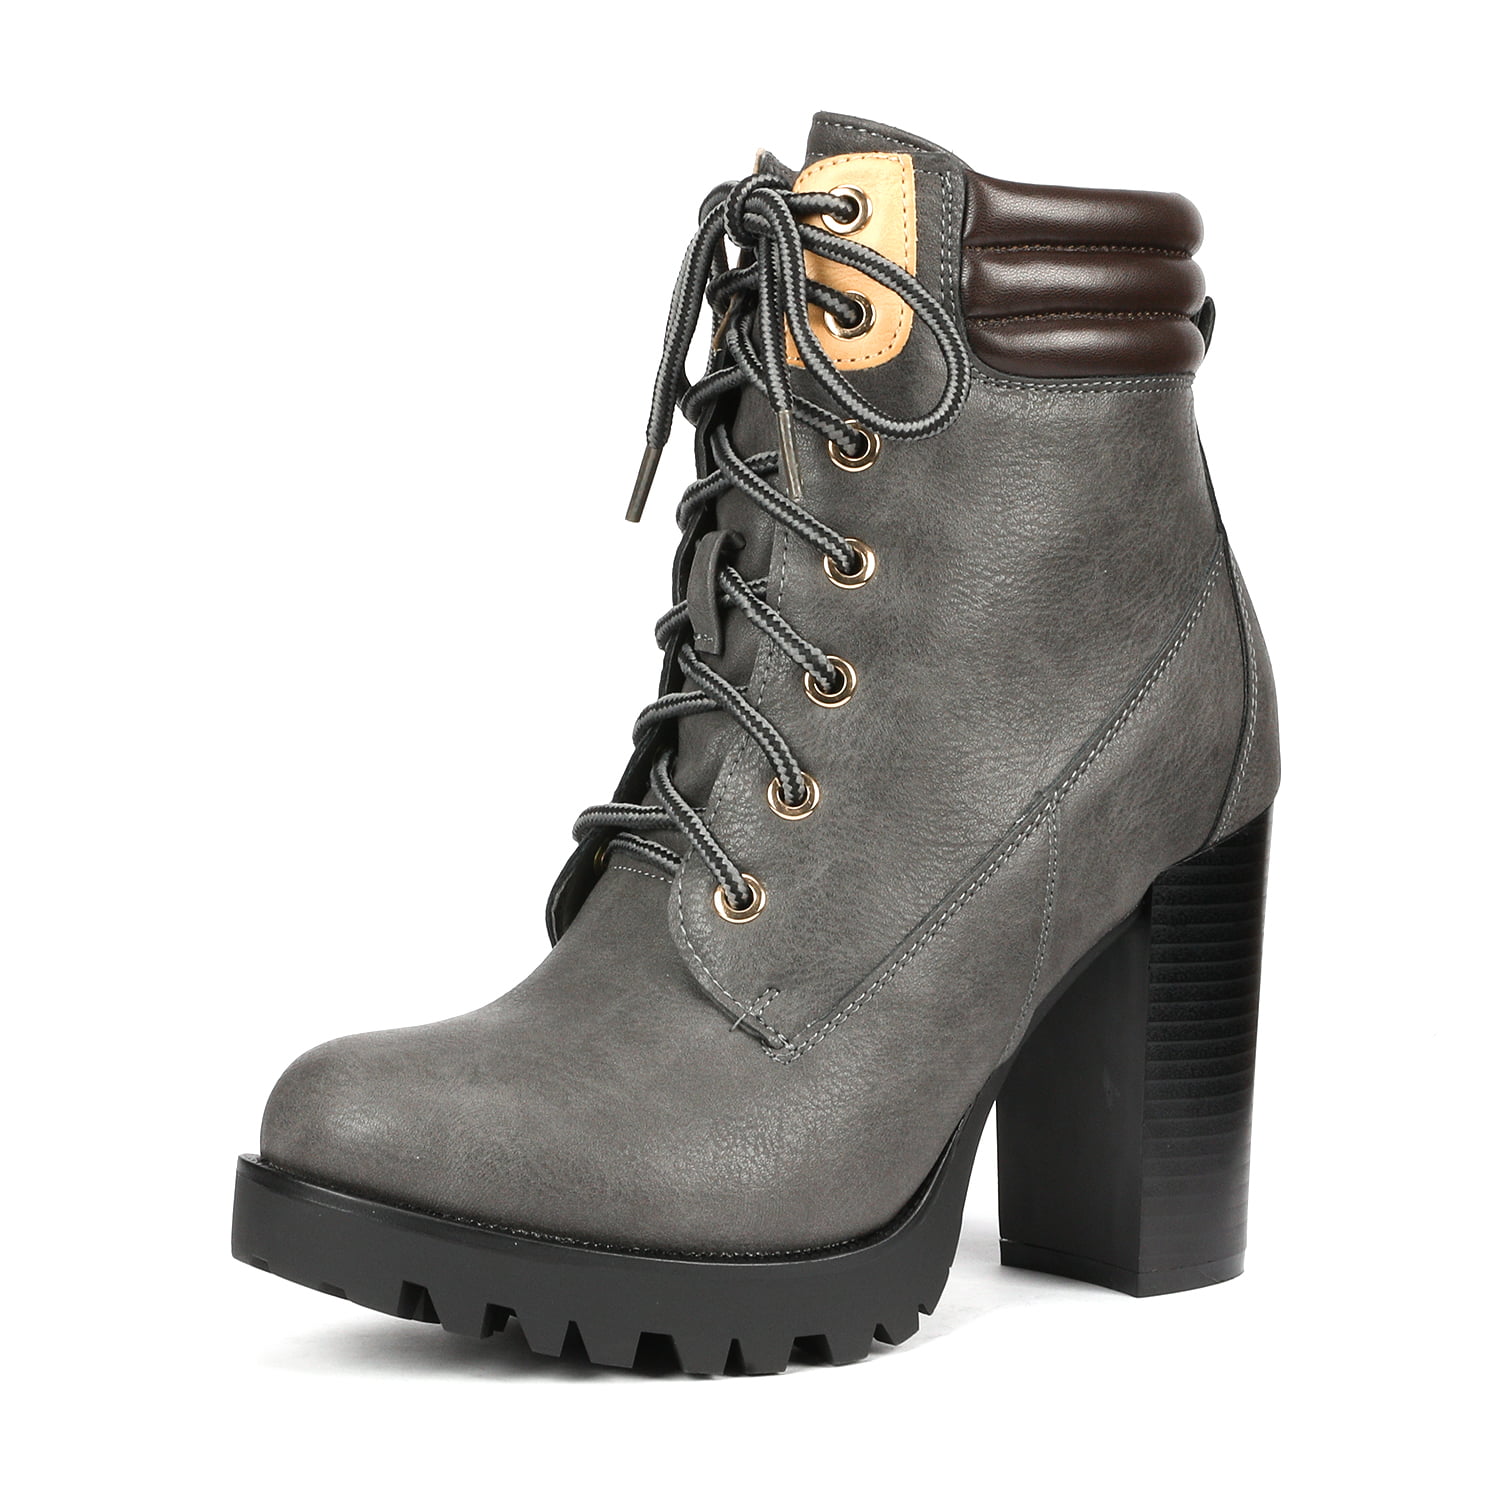 DREAM PAIRS Womens Combat Lace Up Ankle Boots 